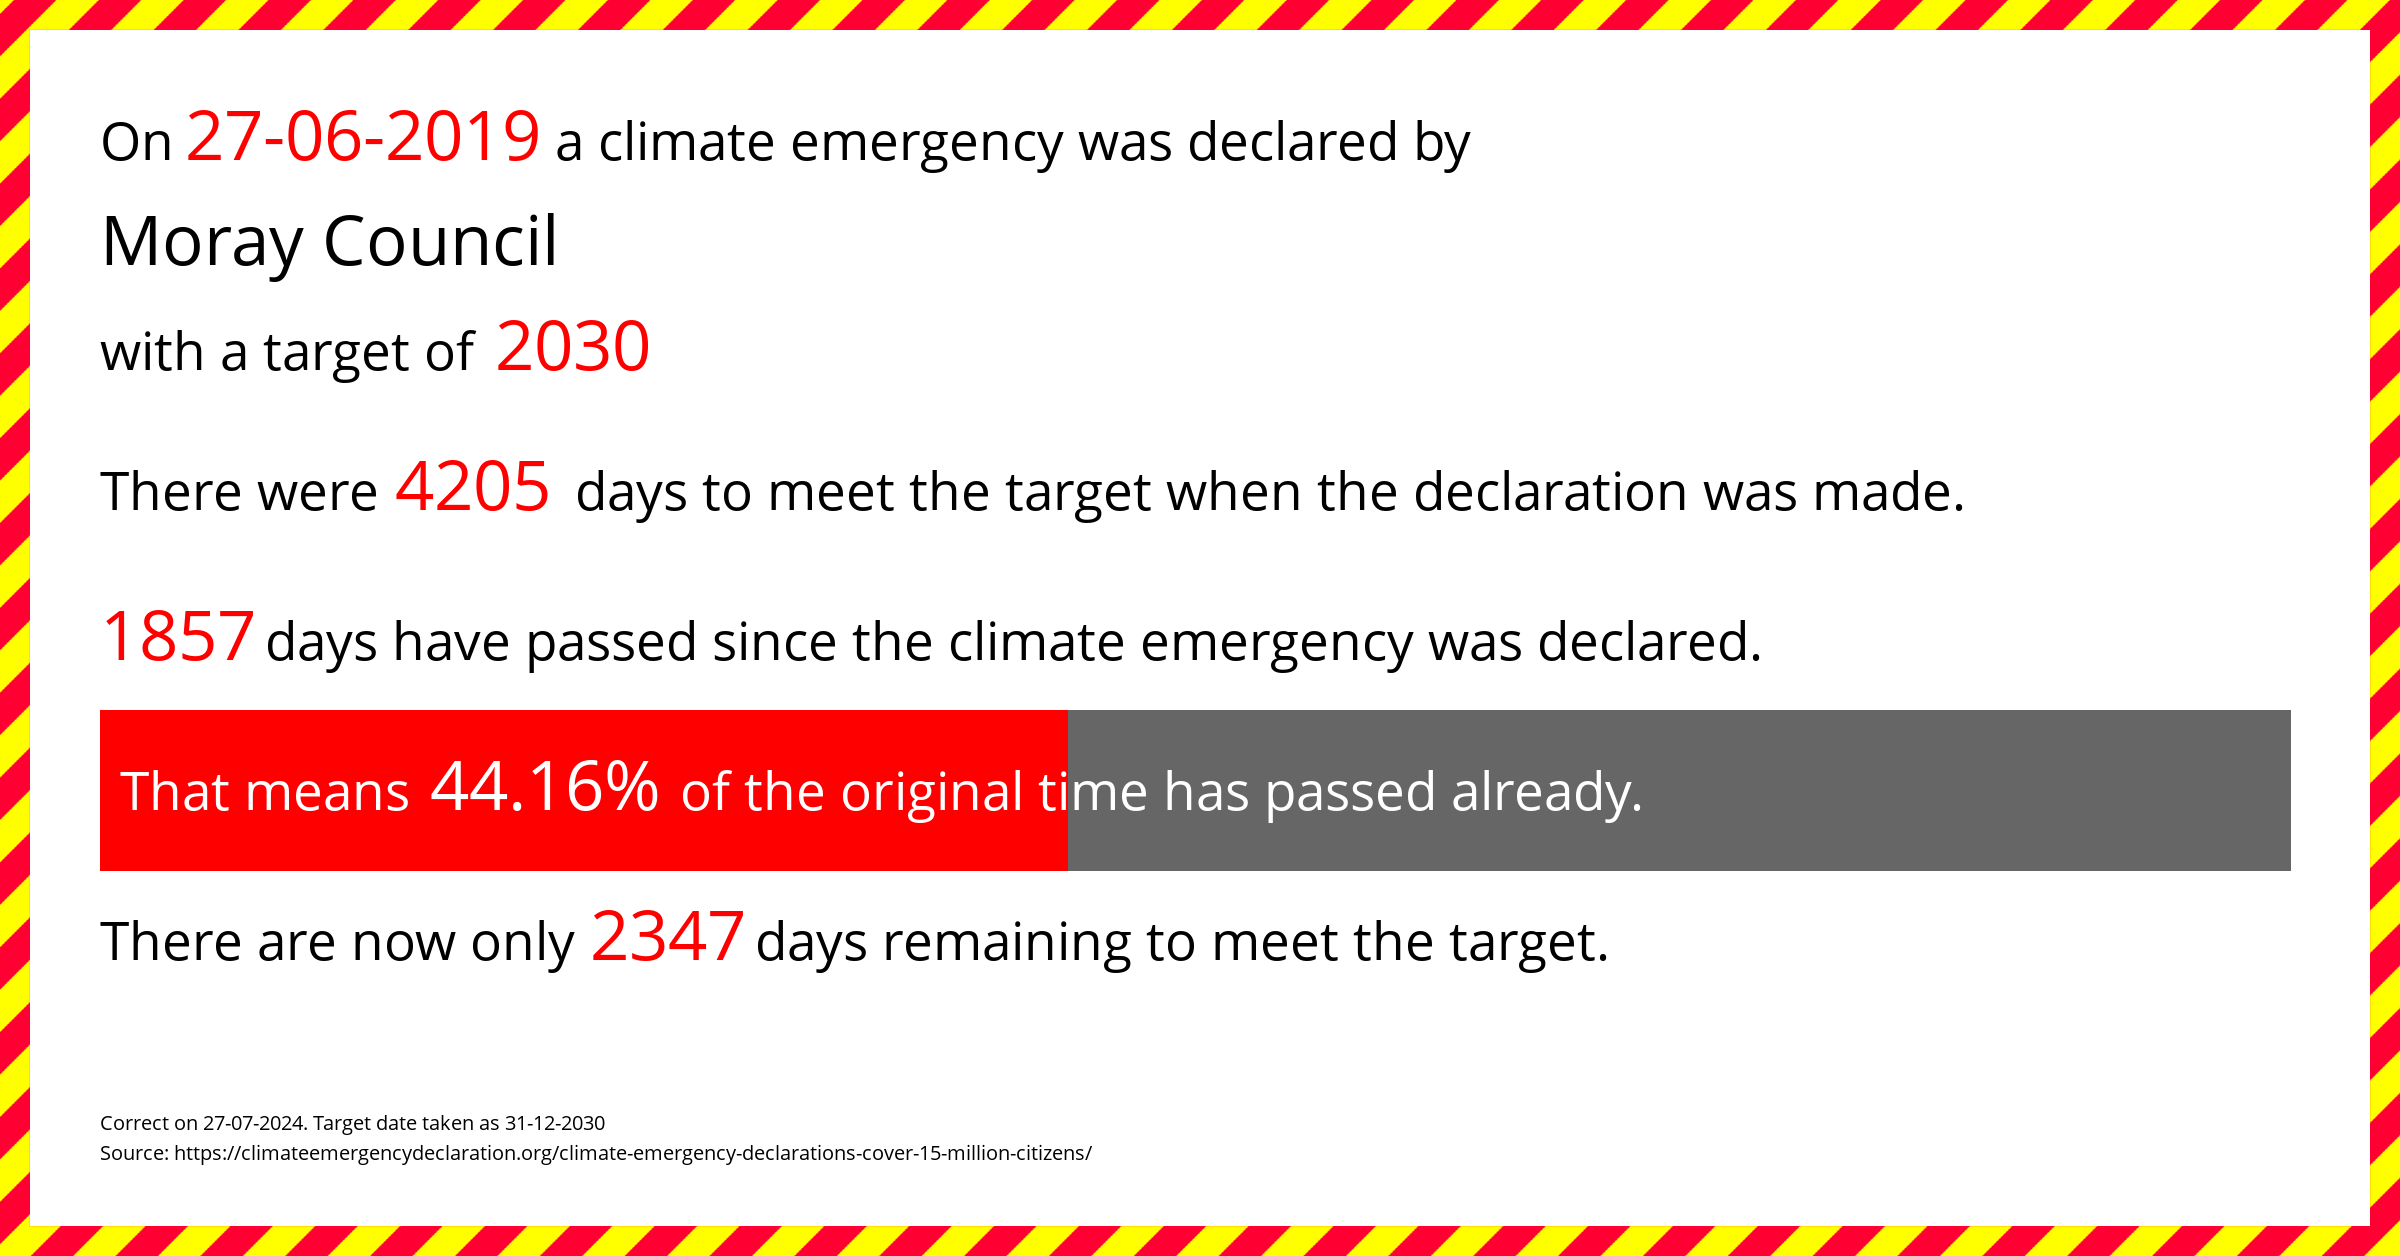 Moray Council declared a Climate emergency on Thursday 27th June 2019, with a target of 2030.